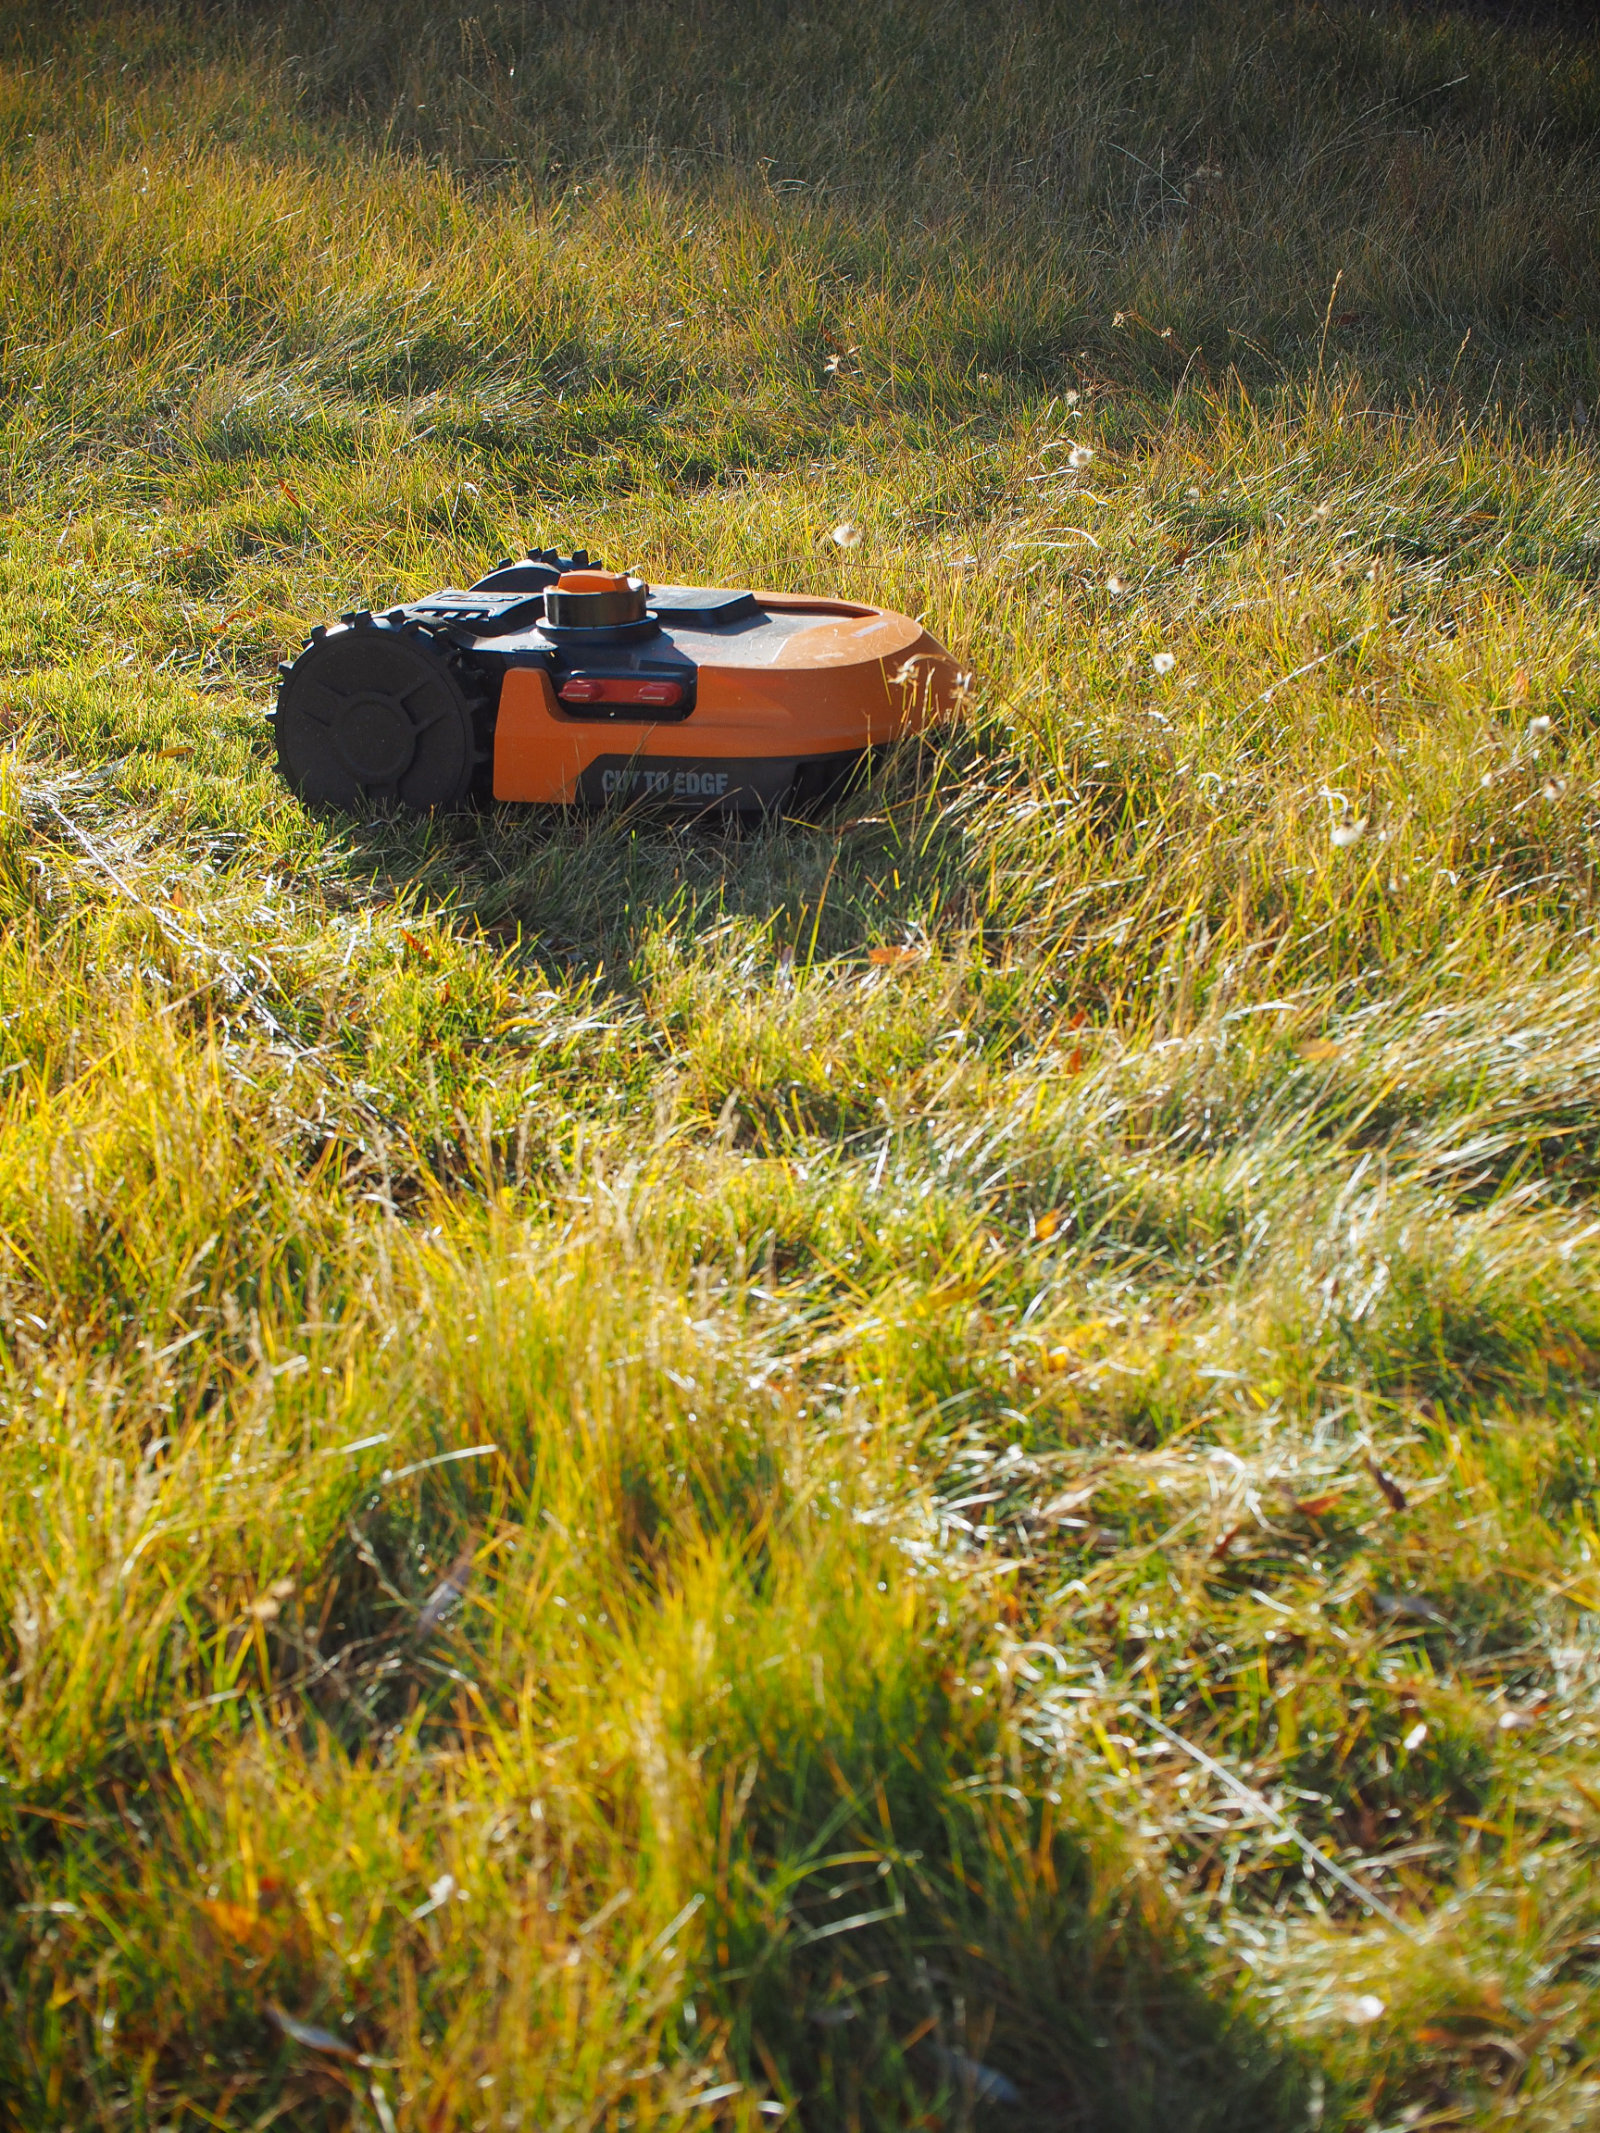 Fall garden cleanup with a robotic lawnmower